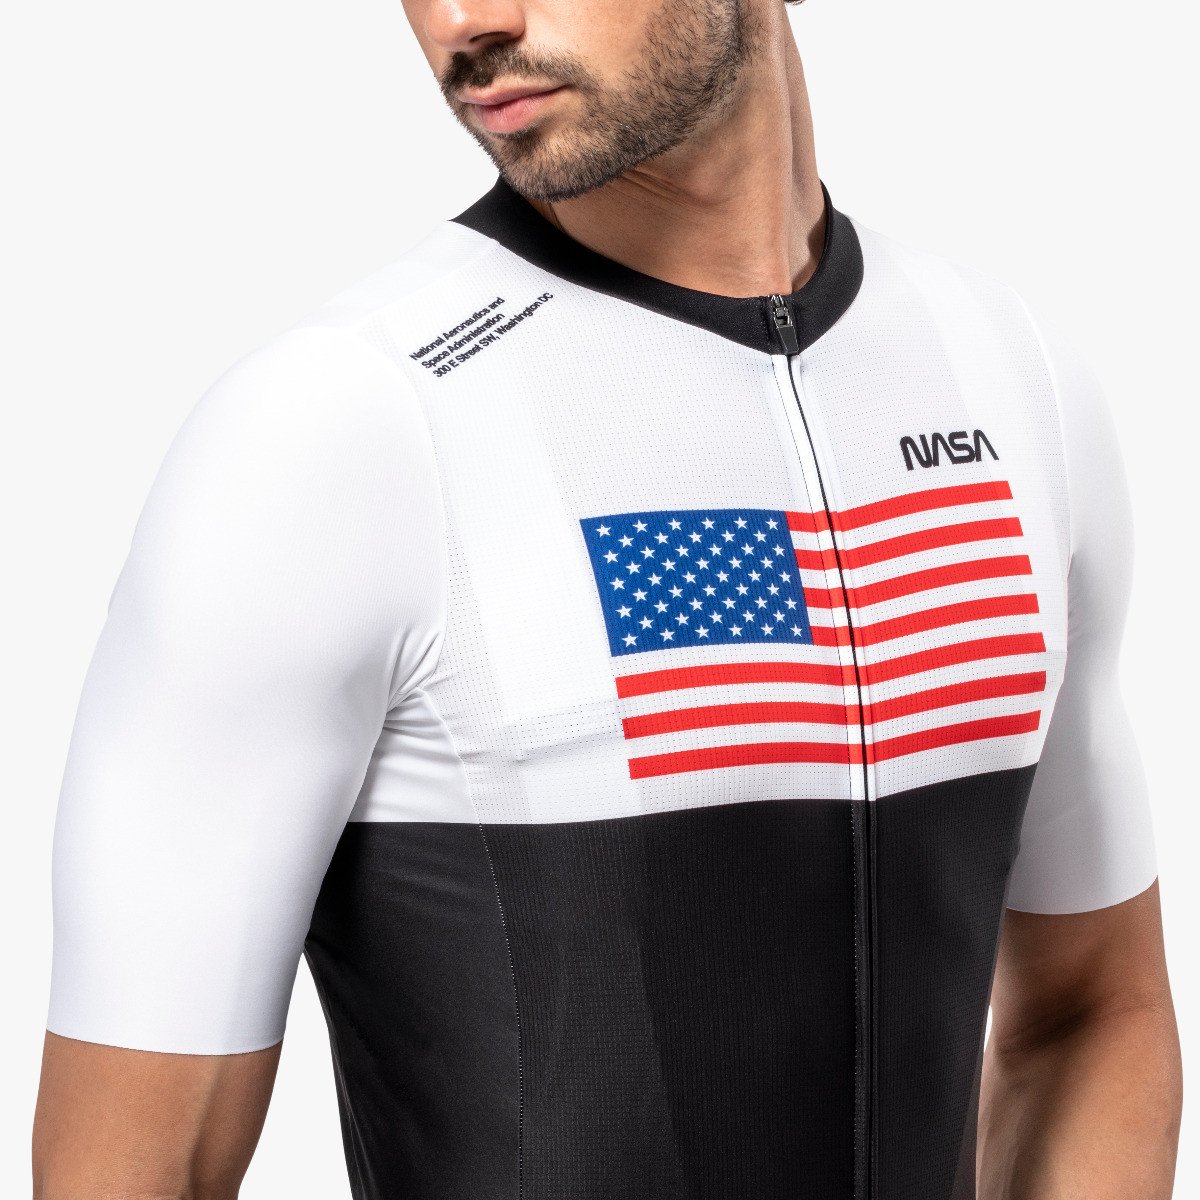 scicon space agency cycling clothing jersey nasa 10